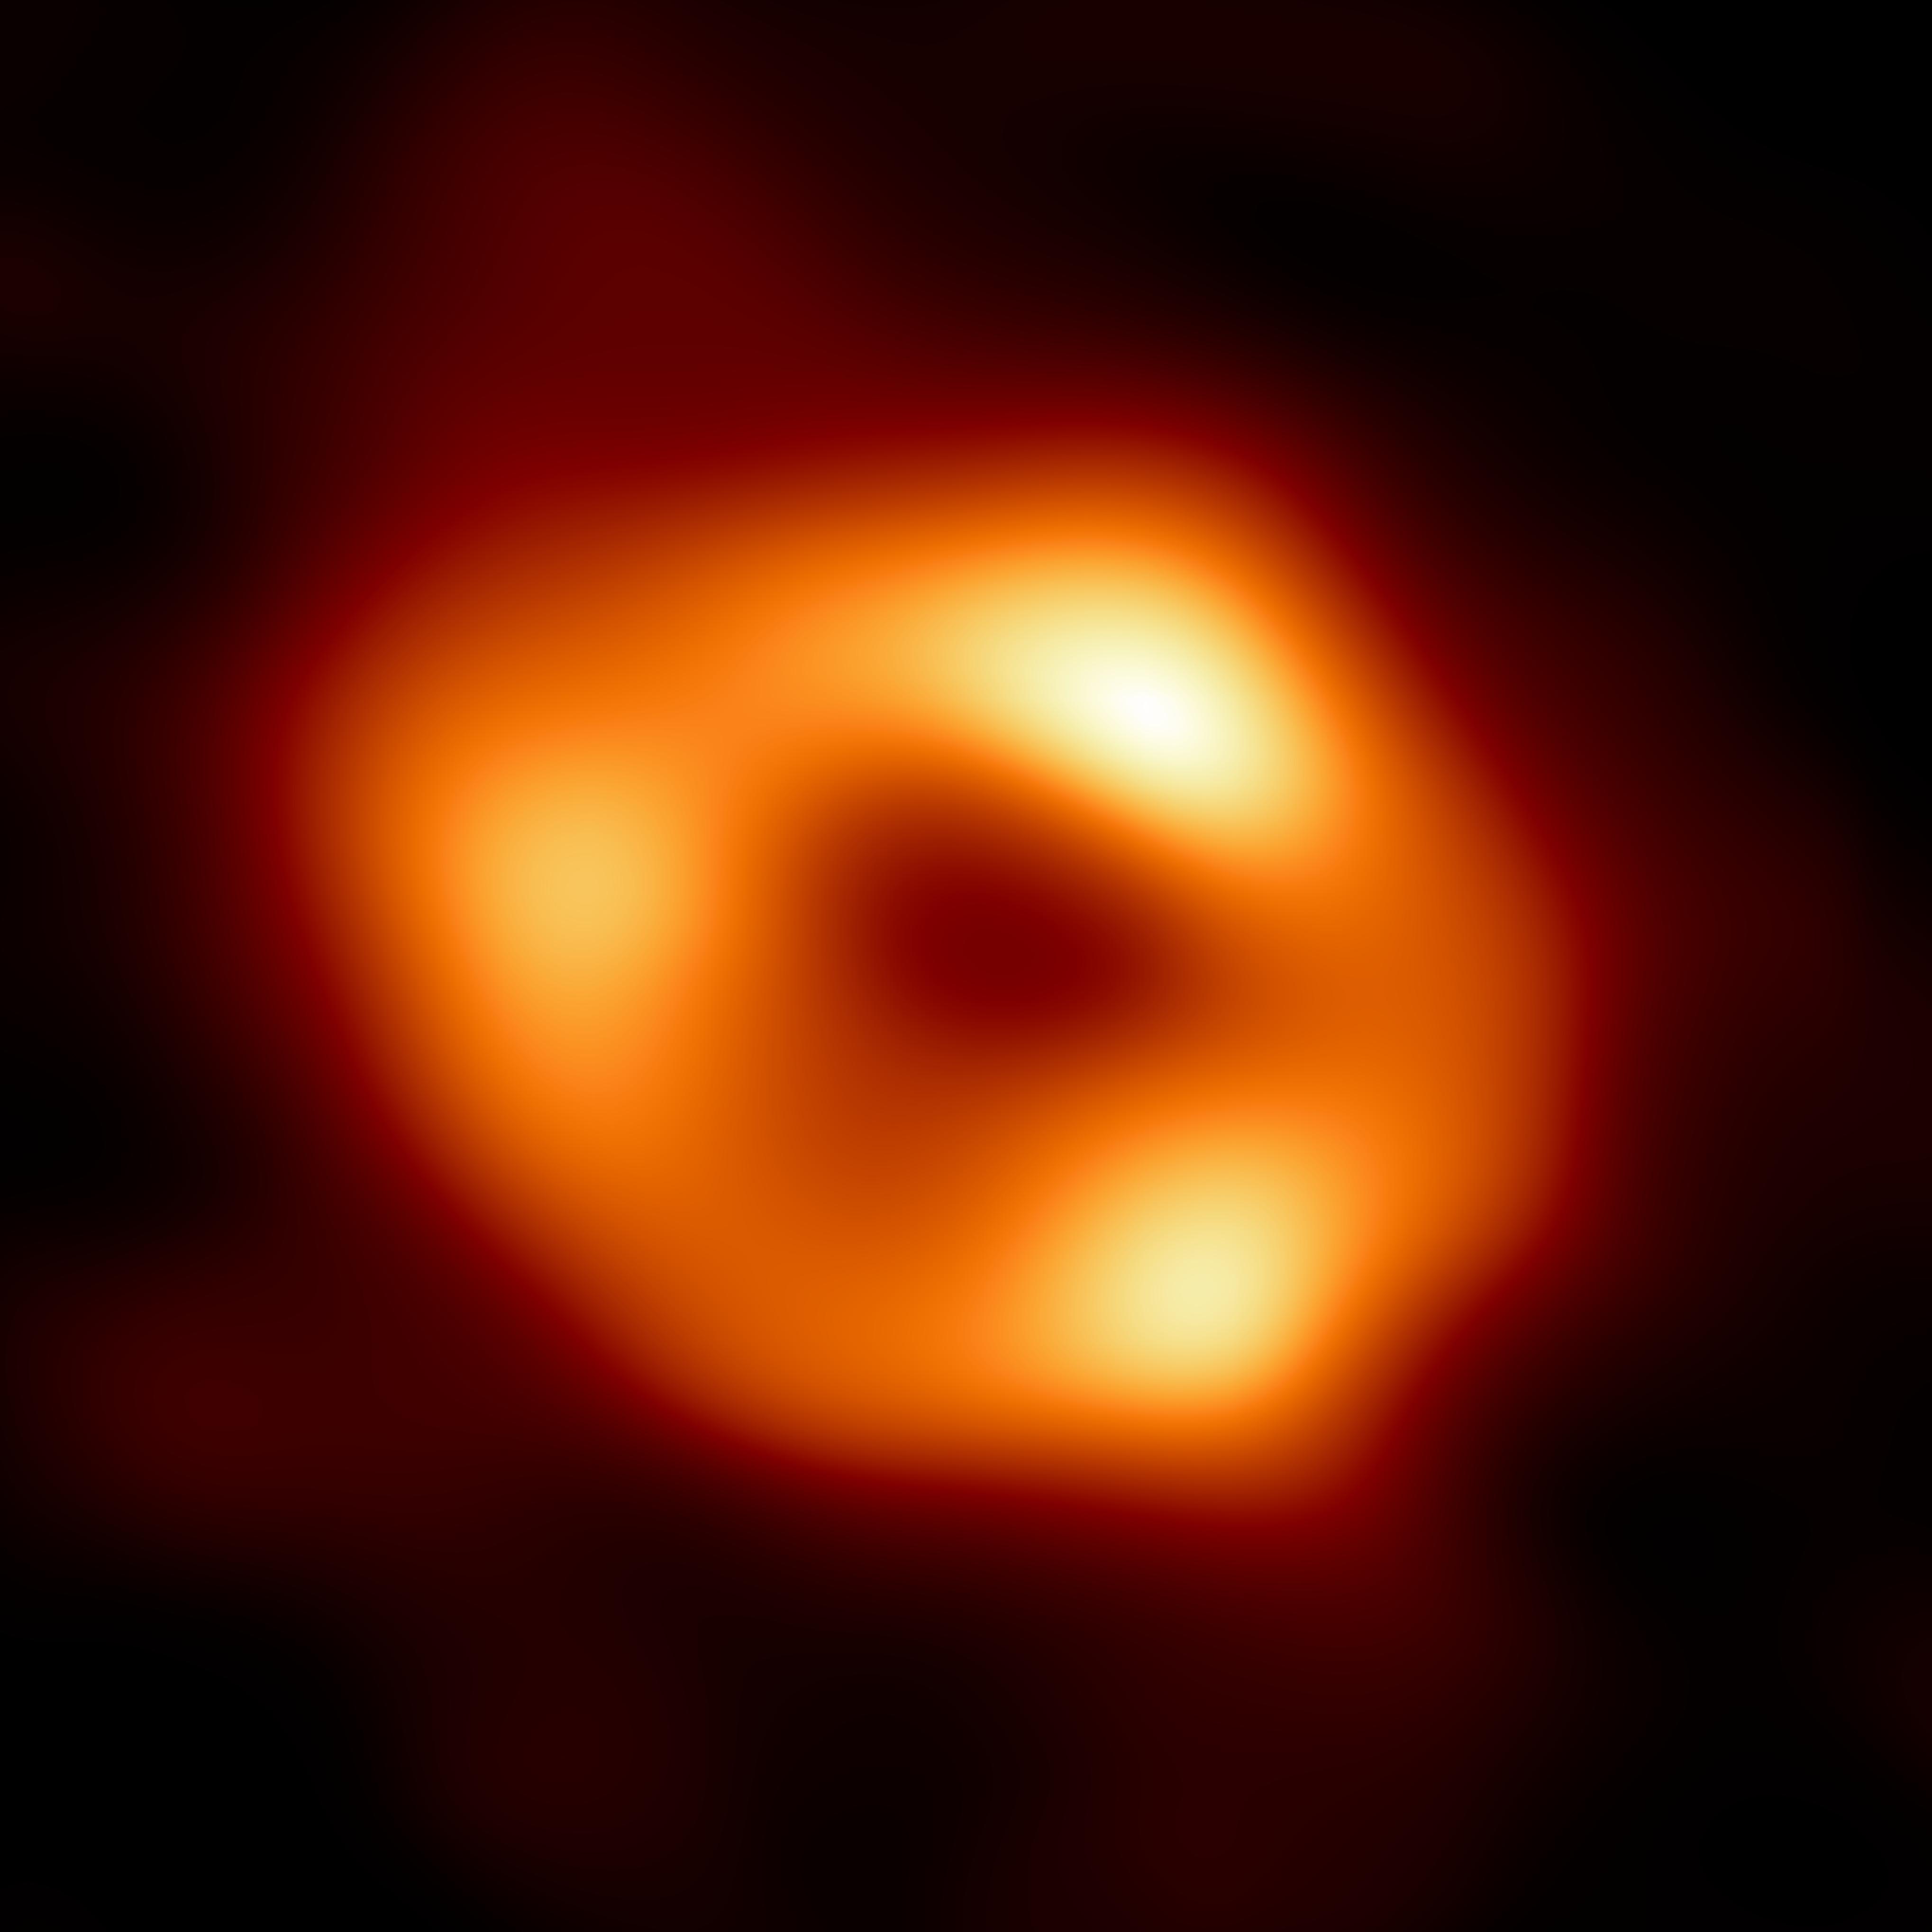 Astronomers reveal first image of the black hole at the heart of our galaxy photo 1